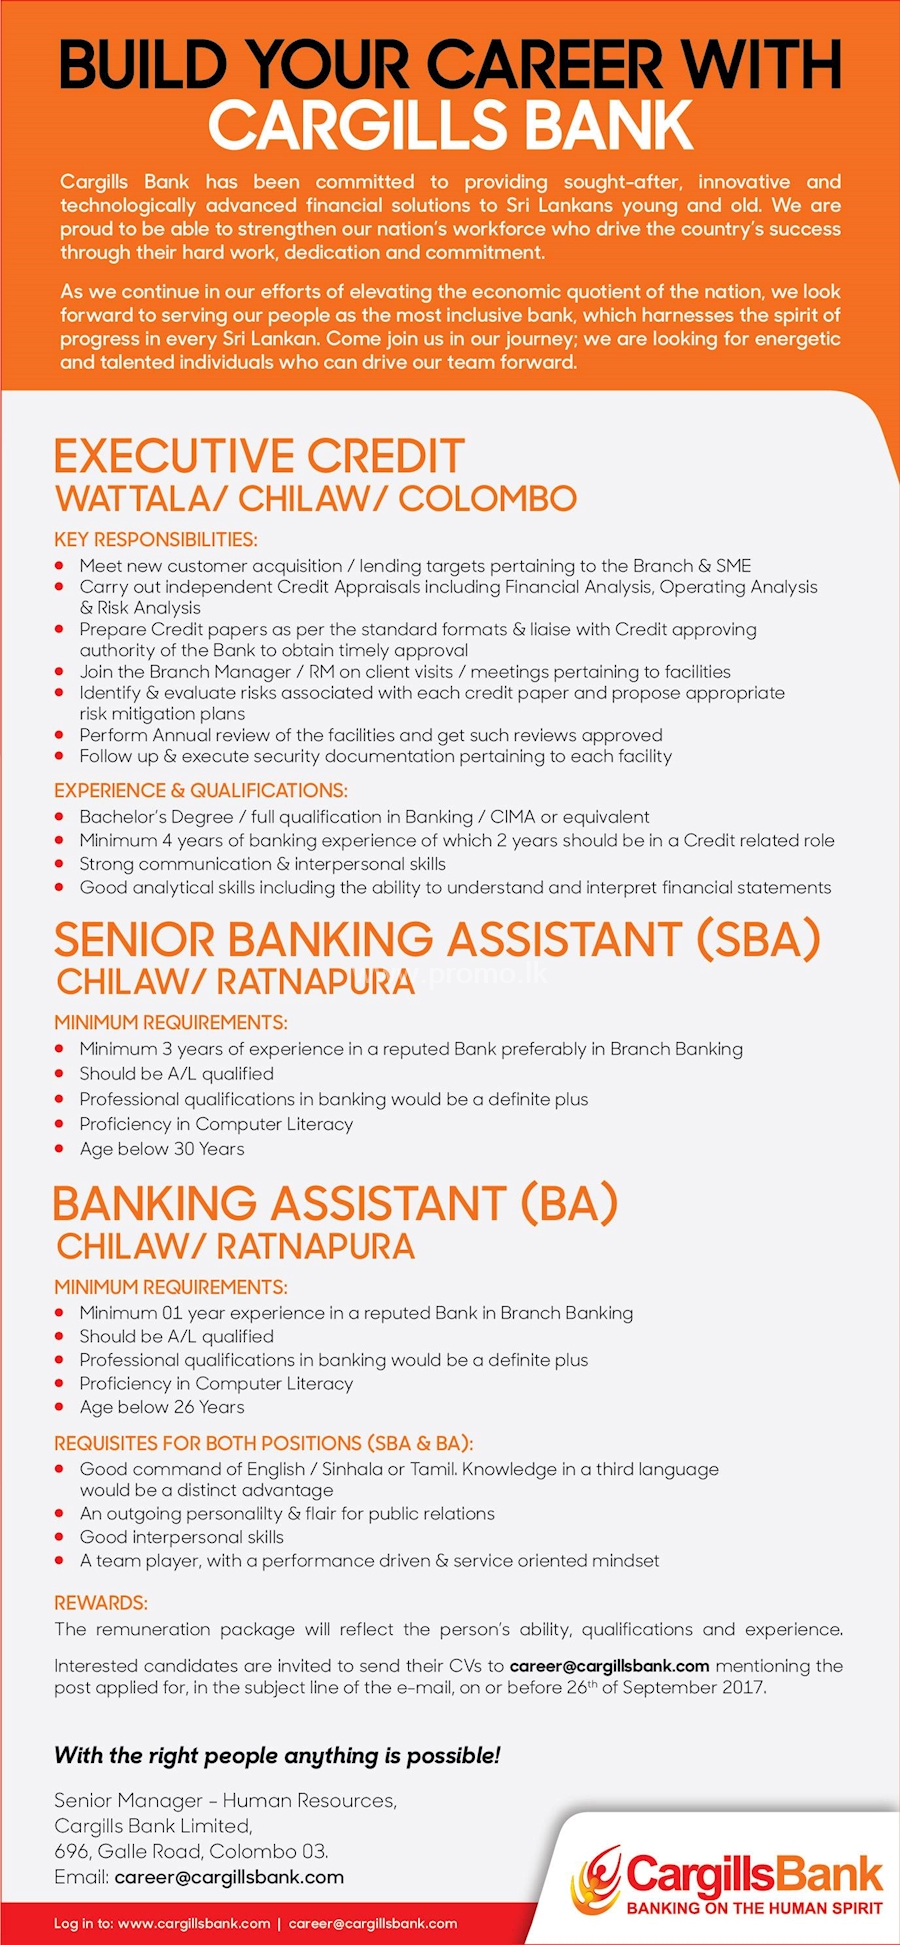 Executive Credit & Senior Banking Assistant / Banking Assistant 